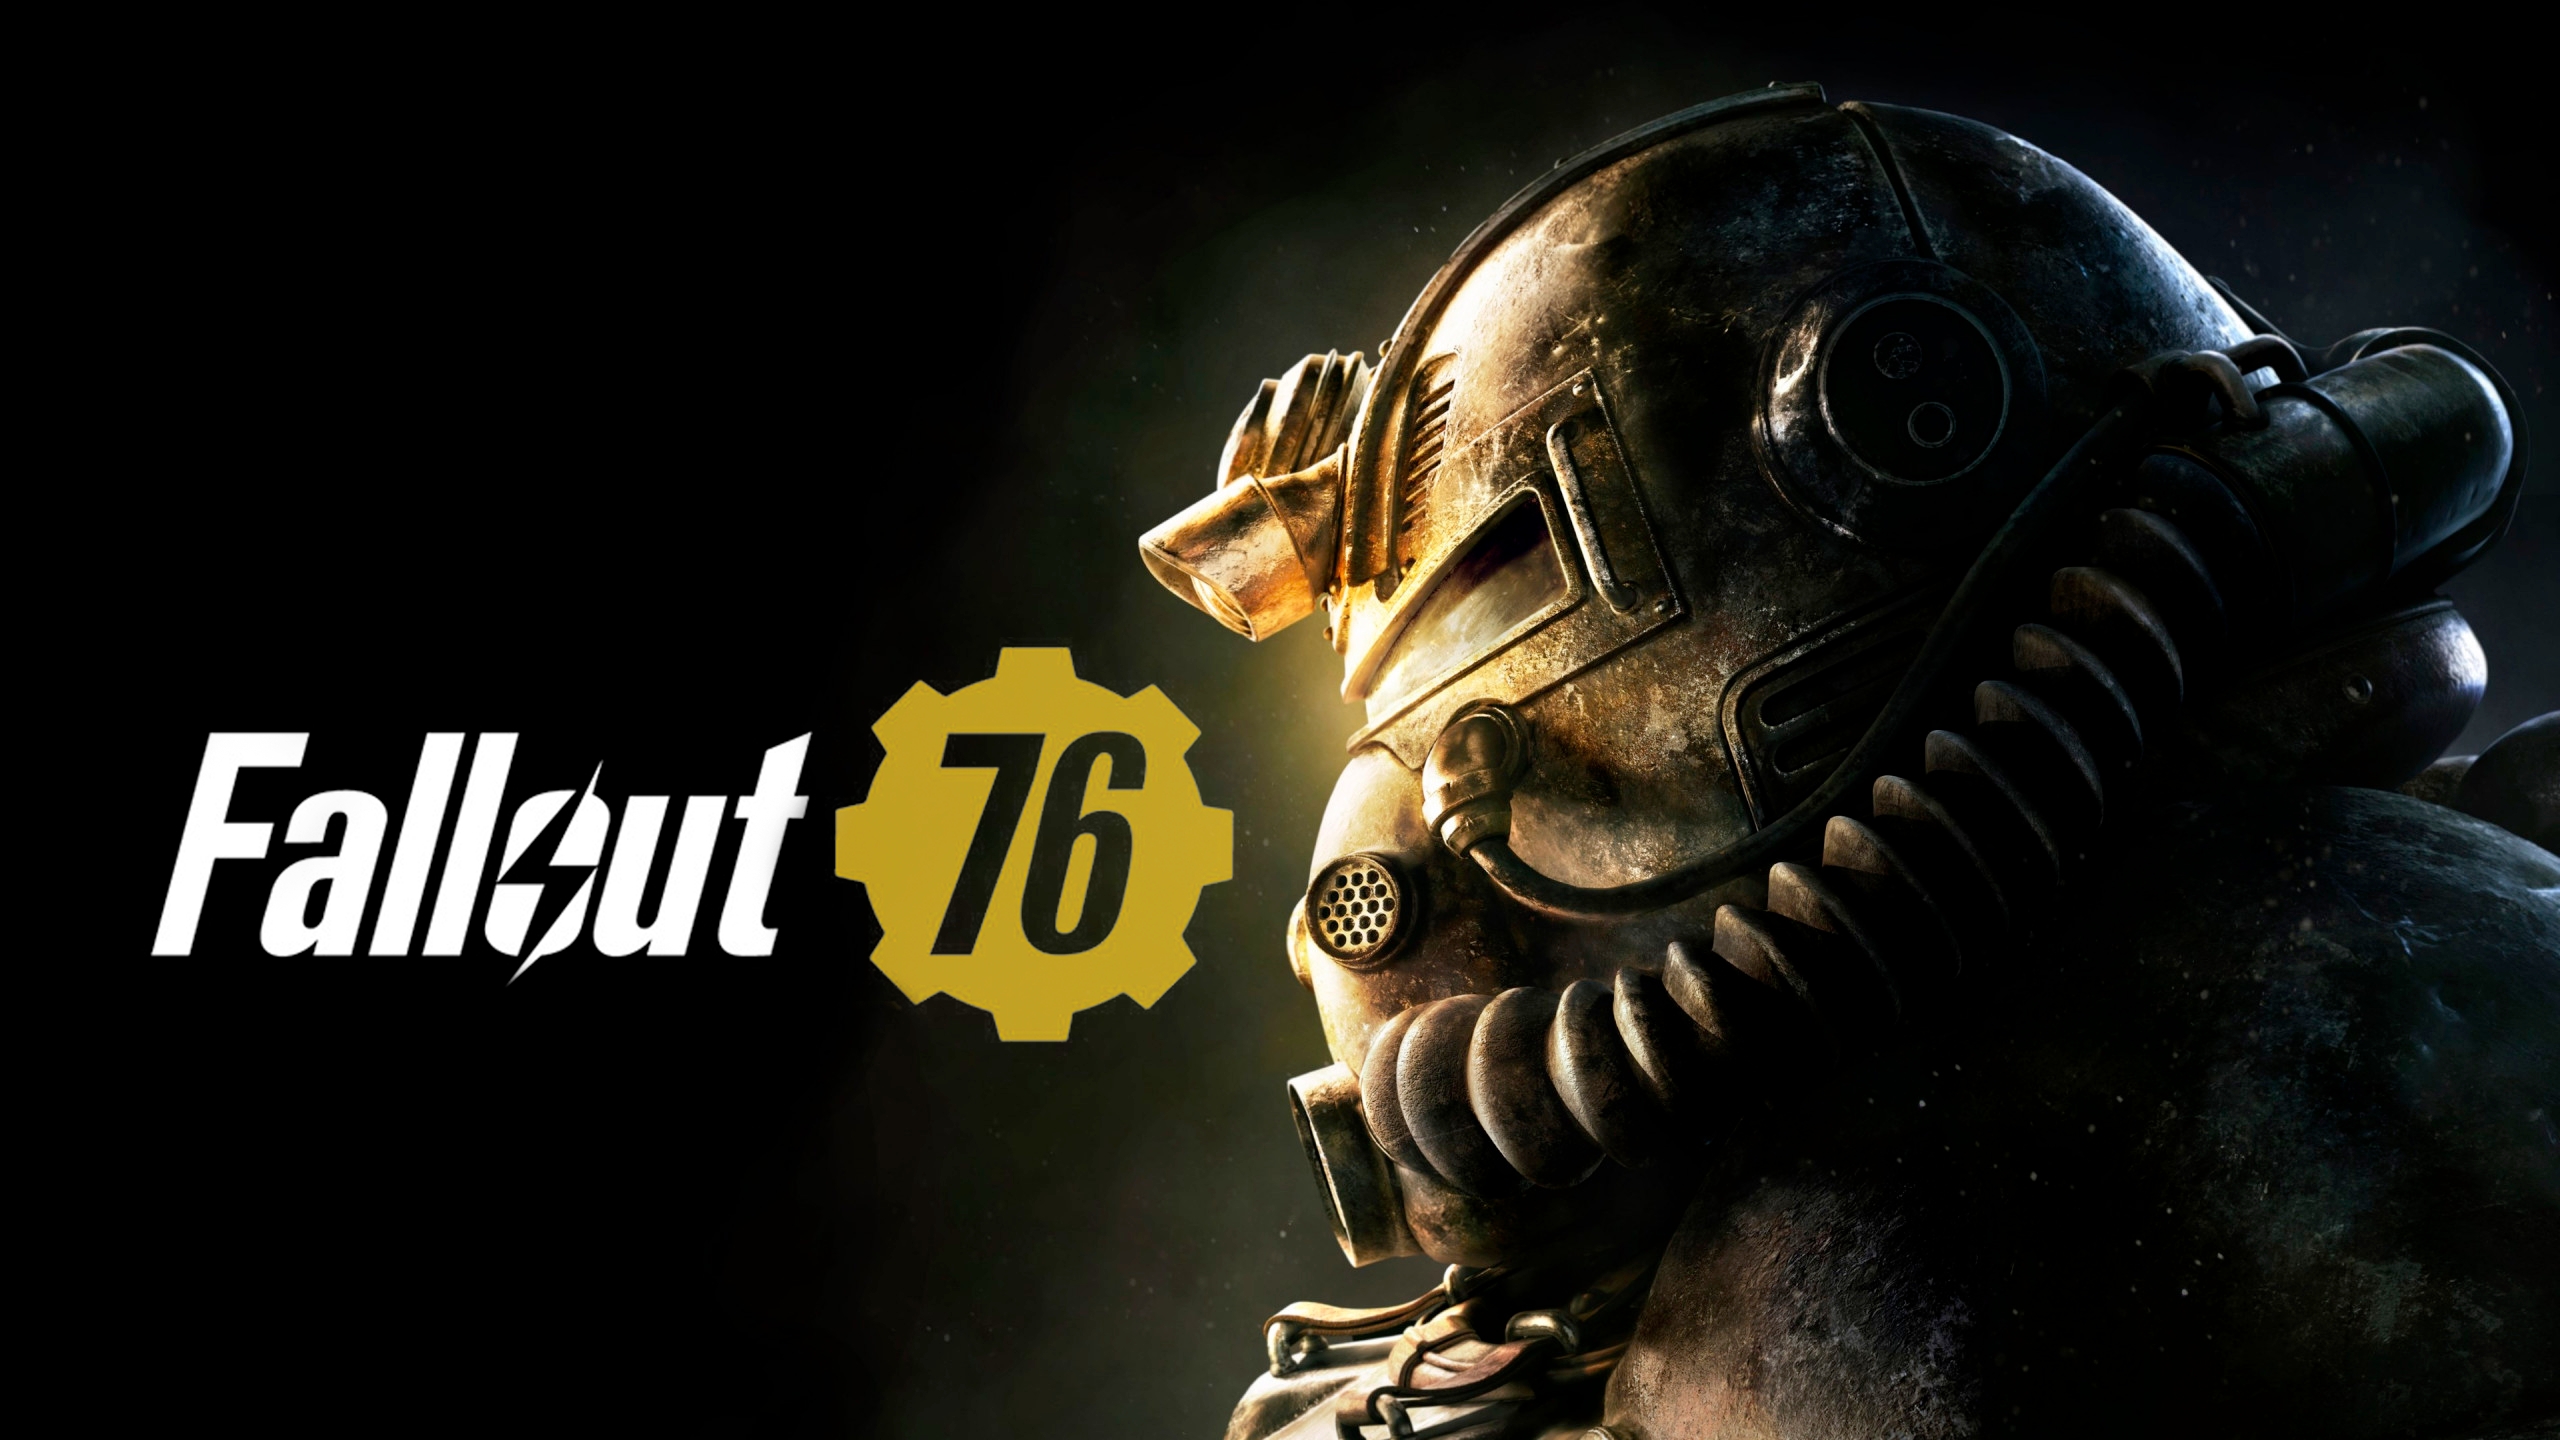 fallout-76-pc-game-steam-cover.jpg